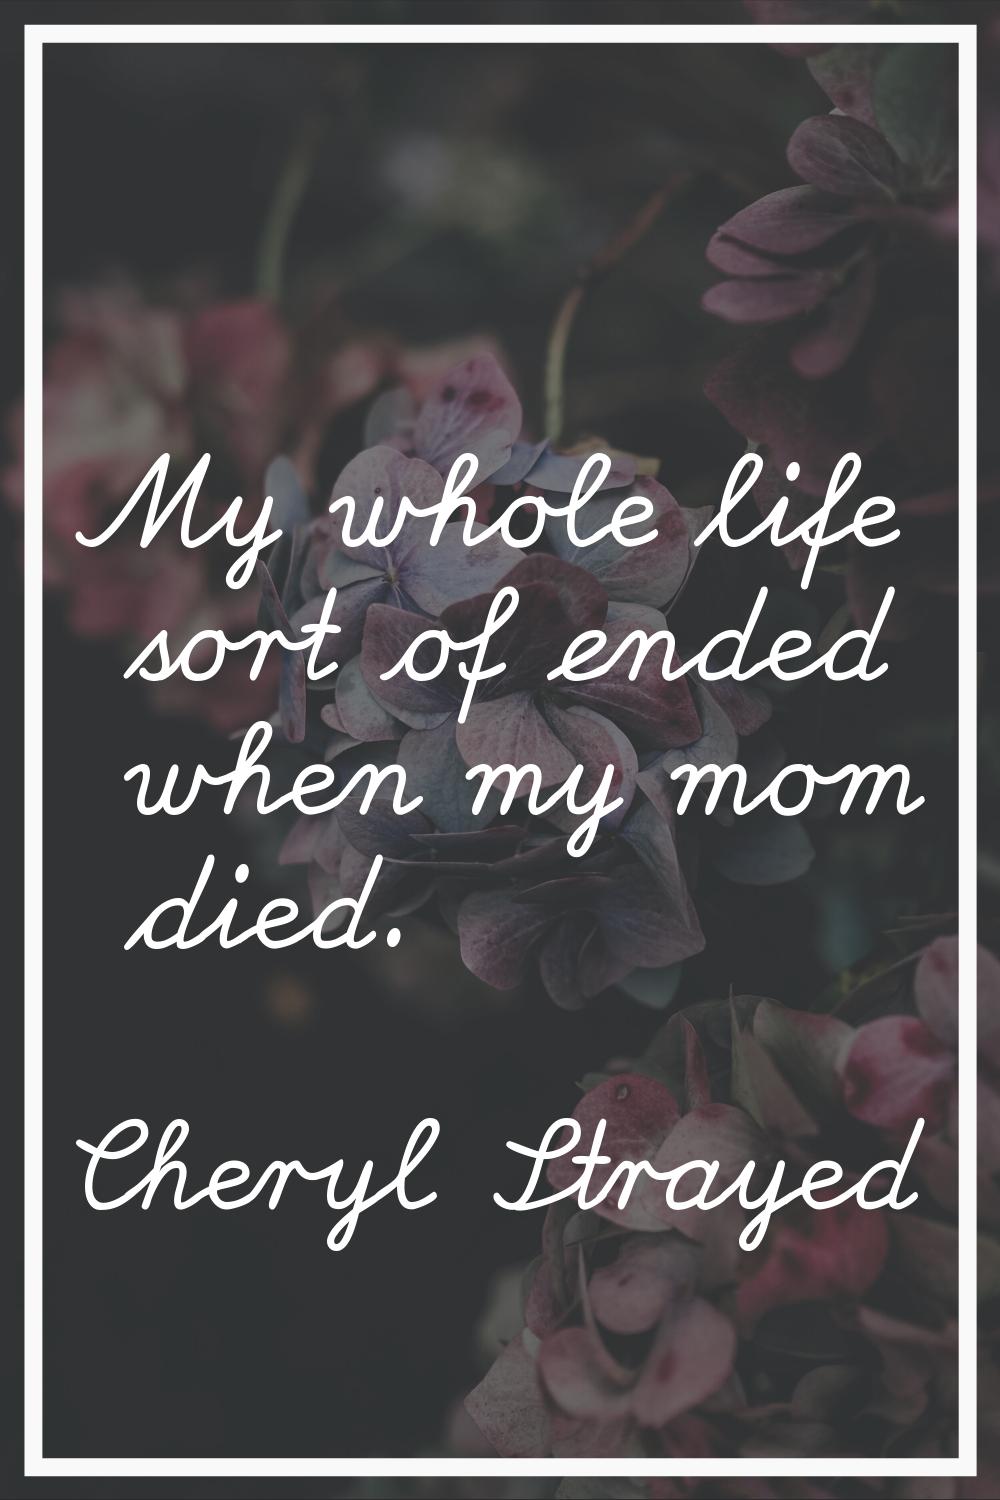 My whole life sort of ended when my mom died.